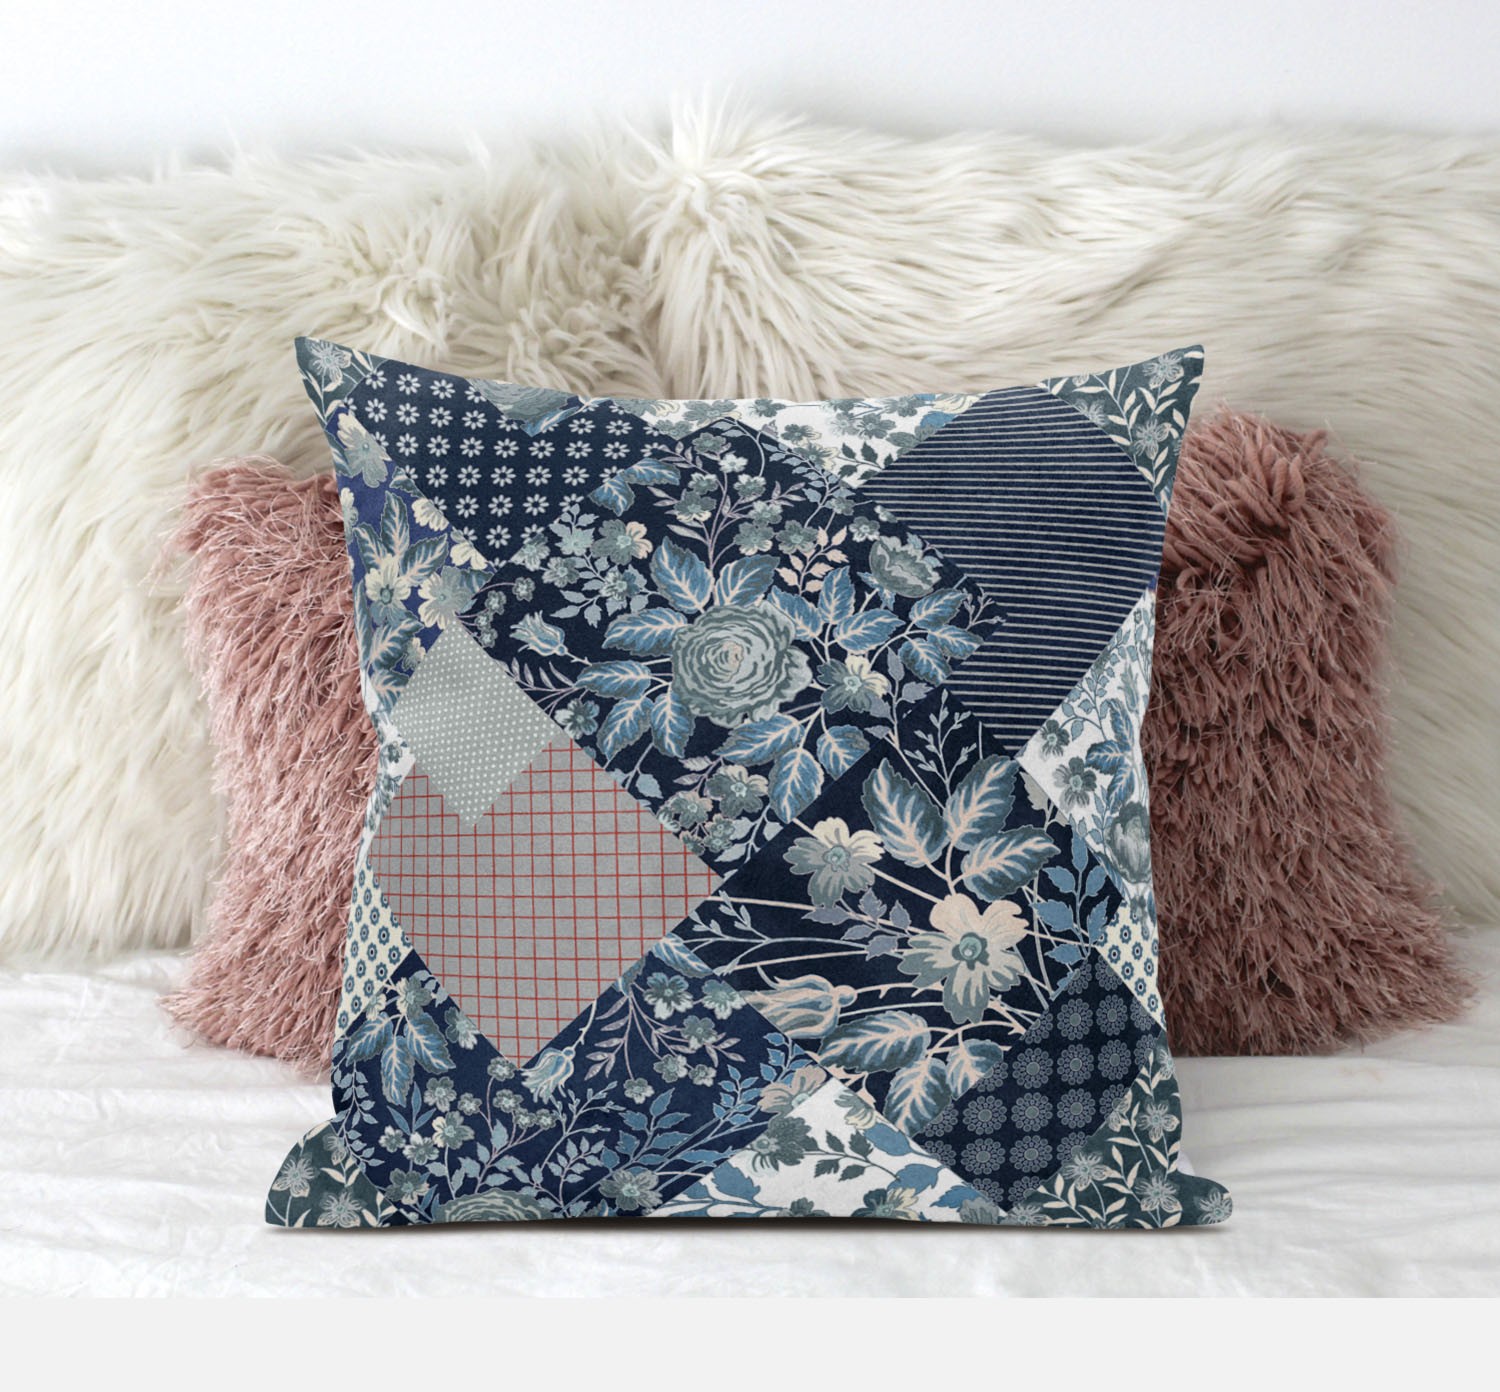 20" Deep Blue Gray Floral Suede Throw Pillow-411458-1